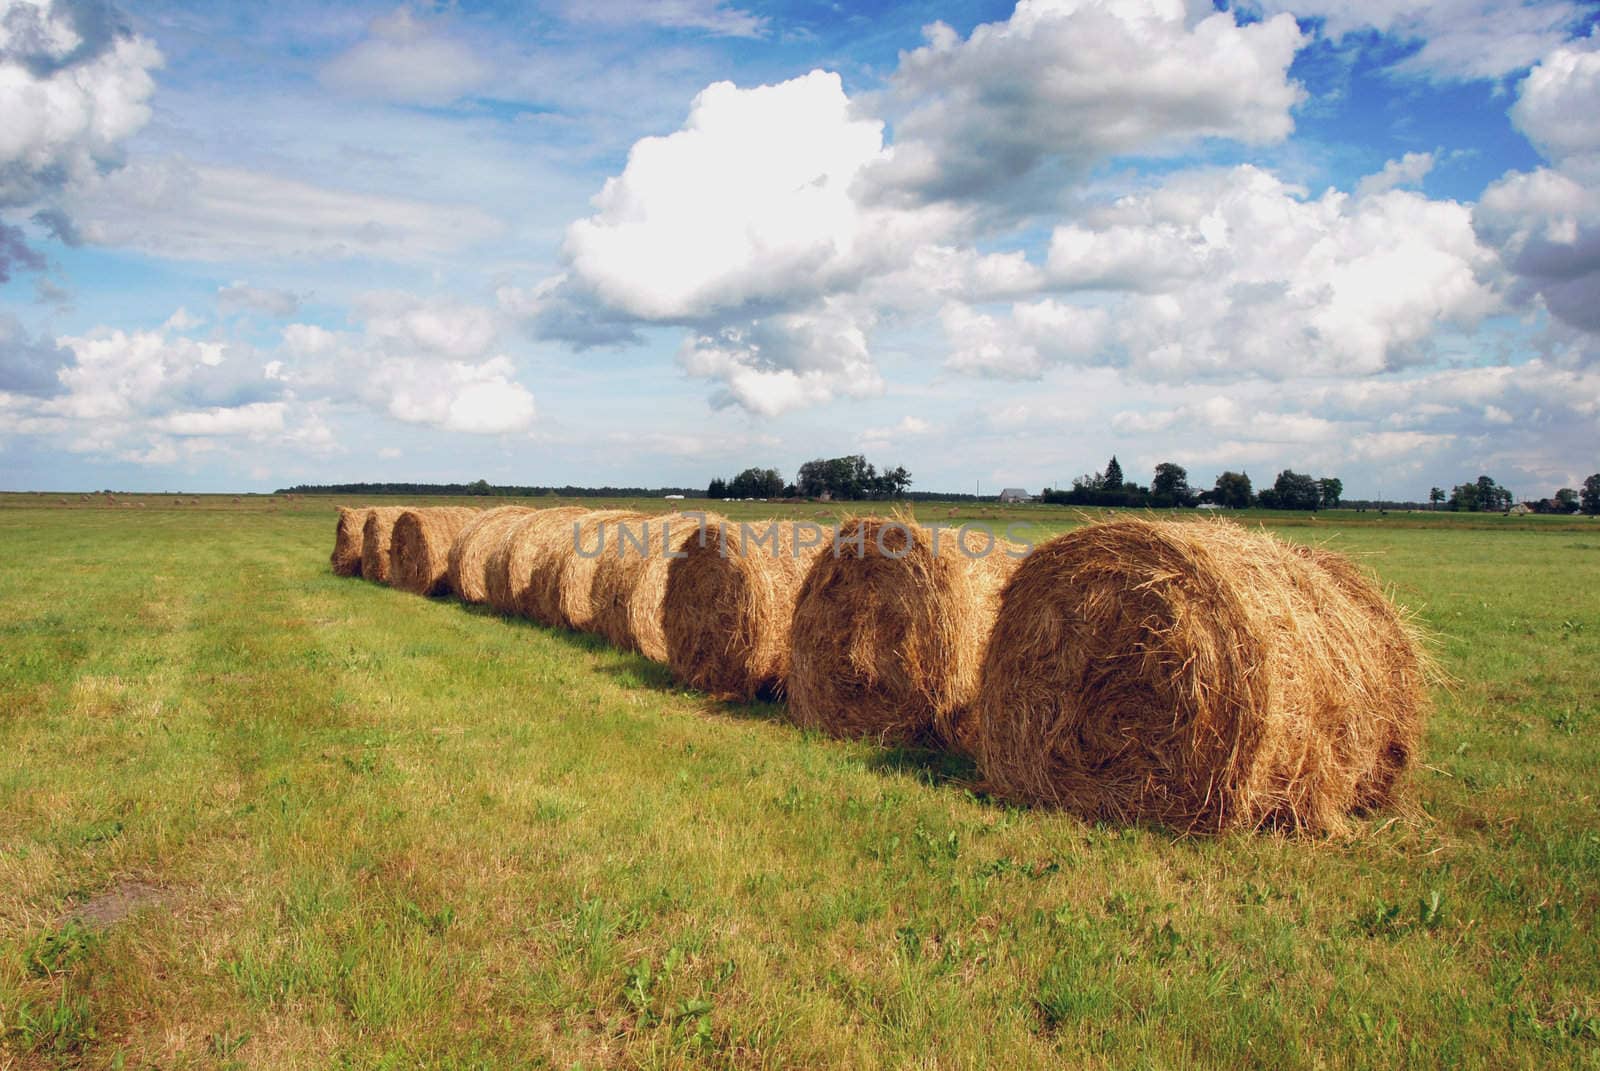 Rye harvest month scenery with straw bales